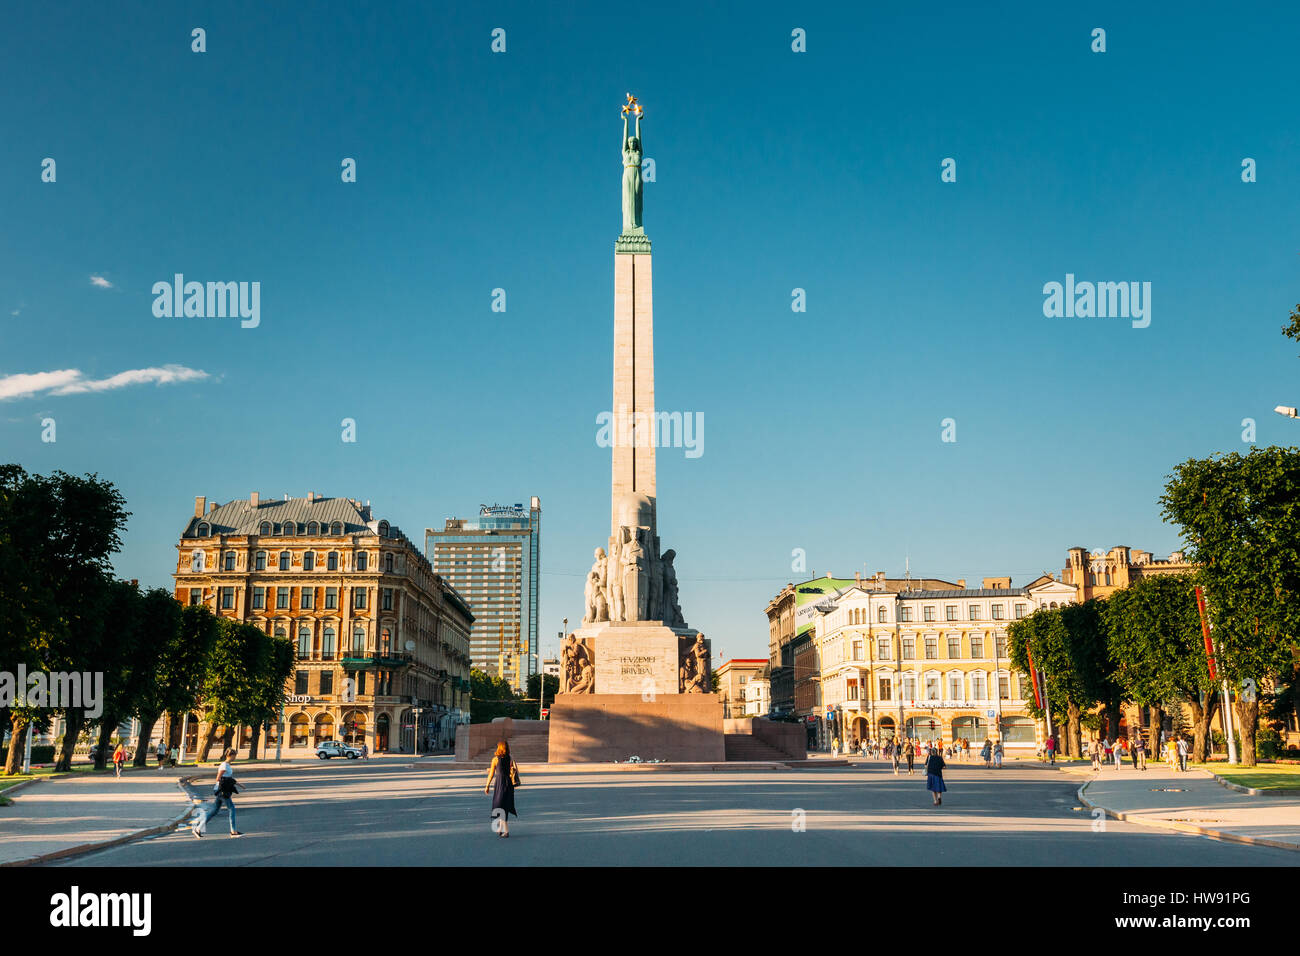 Riga, Latvia - July 1, 2016: People Walking Near Memorial Freedom Monument At Freedom Square In Sunny Summer Day. Famous Landmark. Stock Photo